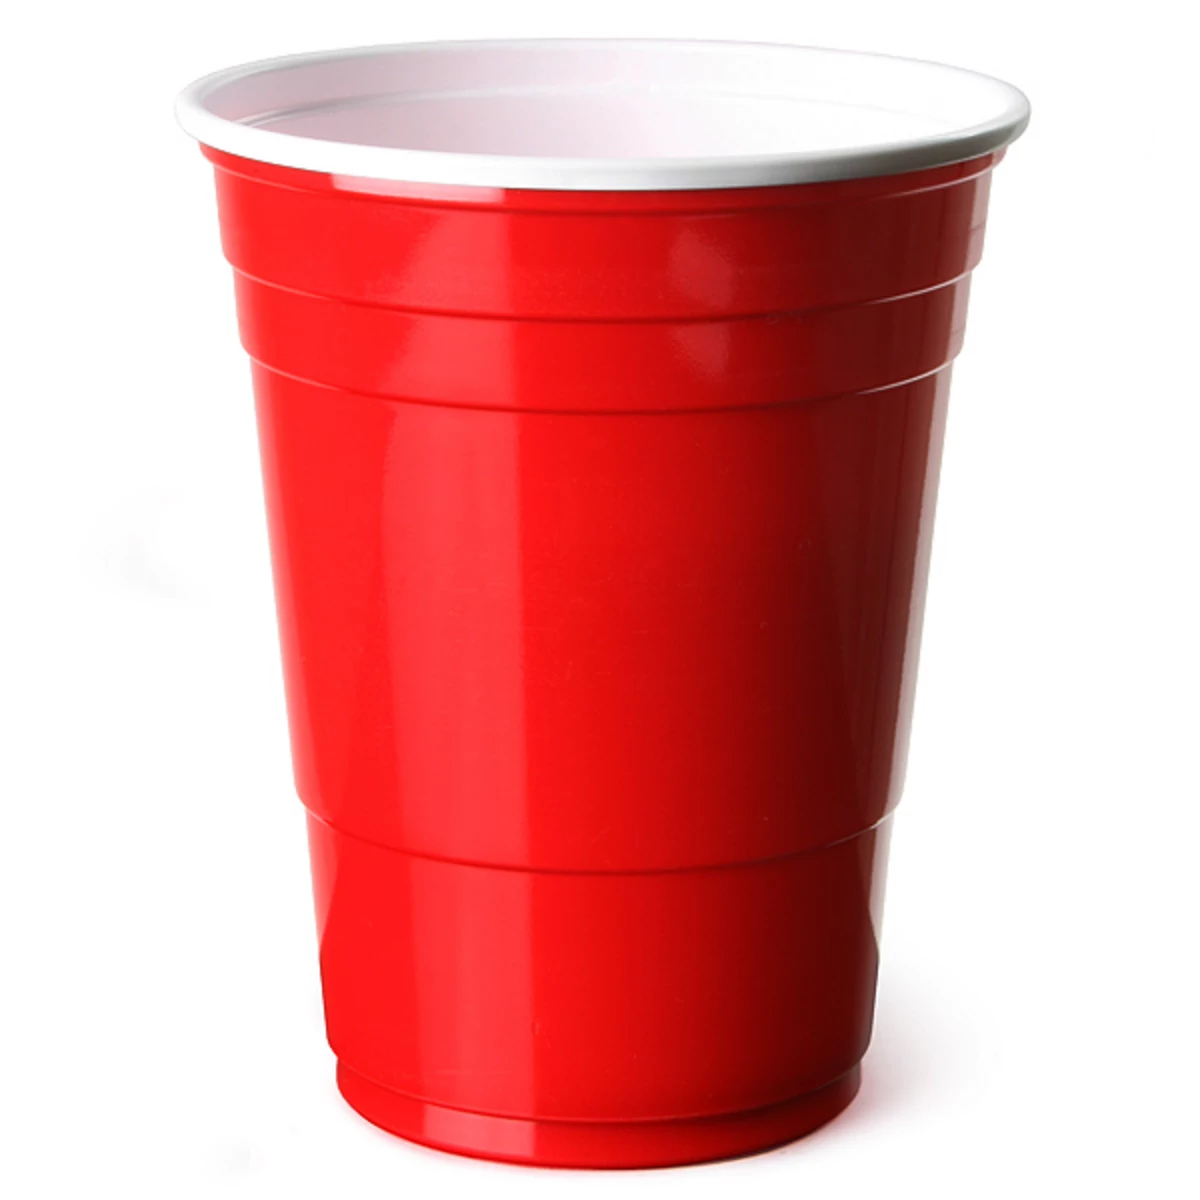 https://townsquare.media/site/470/files/2016/12/red-solo-cup.jpg?w=1200&h=0&zc=1&s=0&a=t&q=89